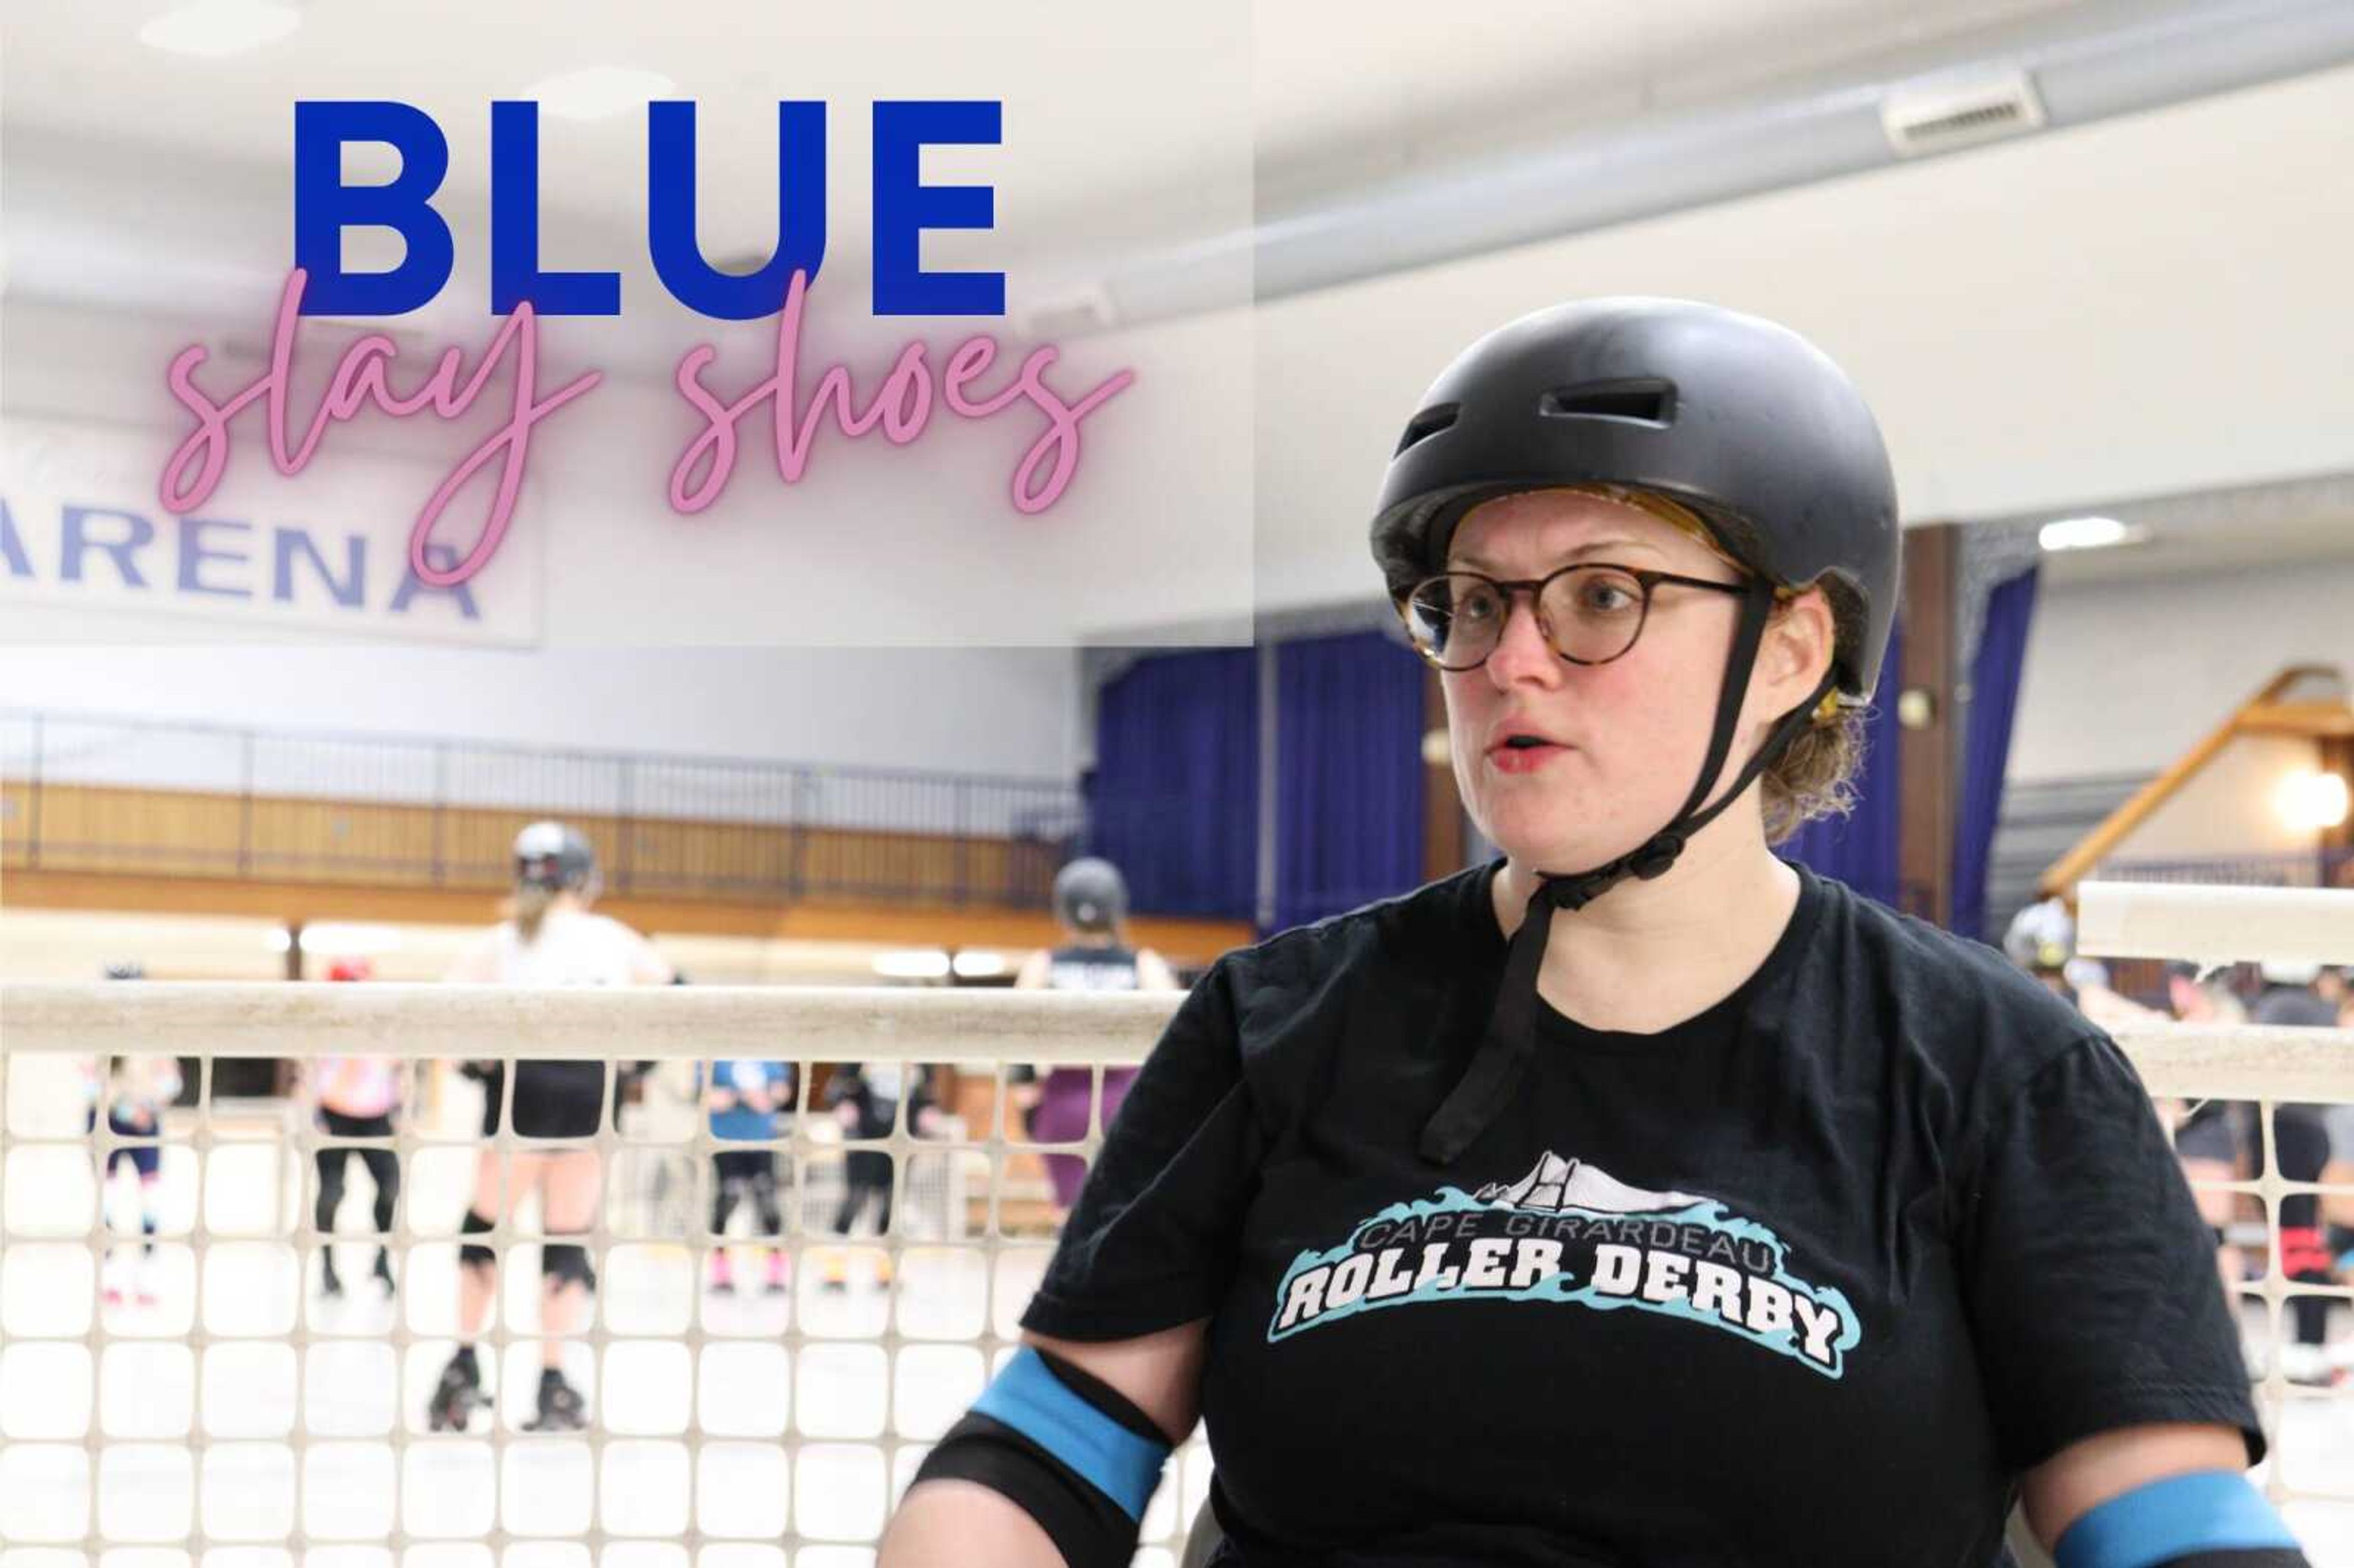 SEMO alum Casey Hinkebein said that derby was one of her outlets for stress relief after a hard day at work. Running drills, casual skating and other activities make up this athletic outlet for members to enjoy.